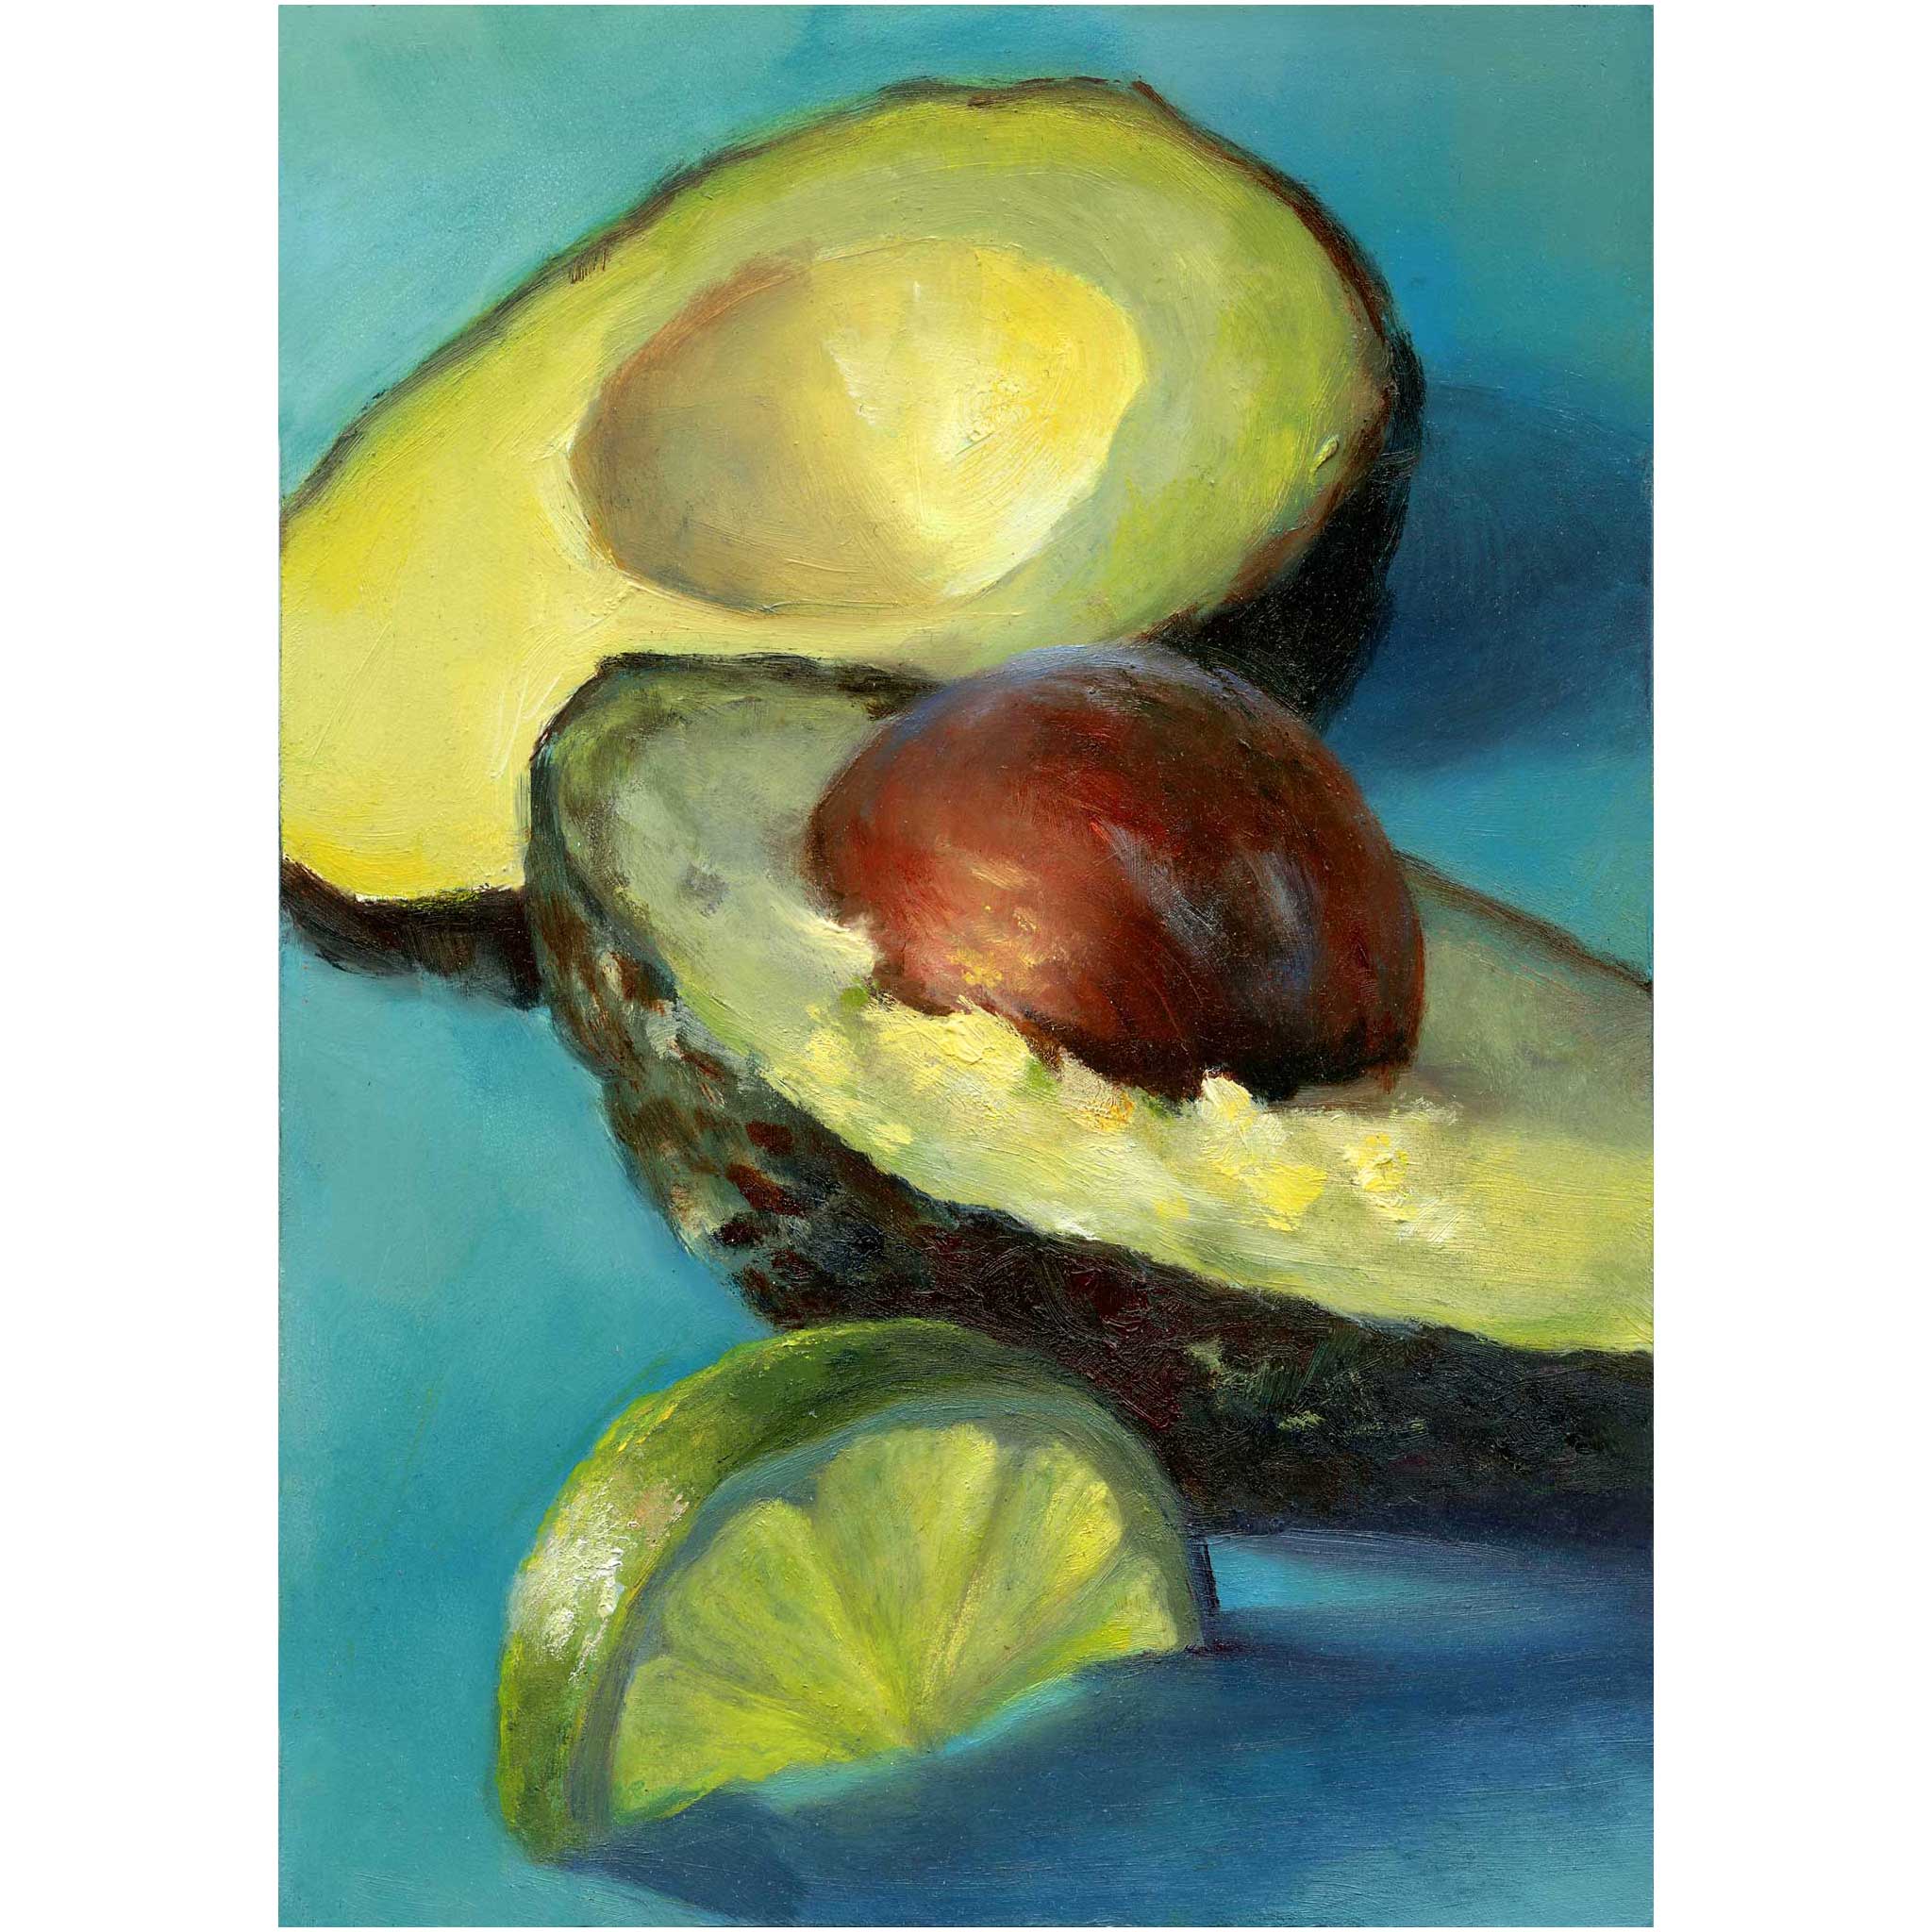 A fresh cut avocado and a slice of lime on a soft turquoise backgroud. This is a giclee print on museum quality paper of my original fruit and vegetable still life oil painting by artist Jo Bradney